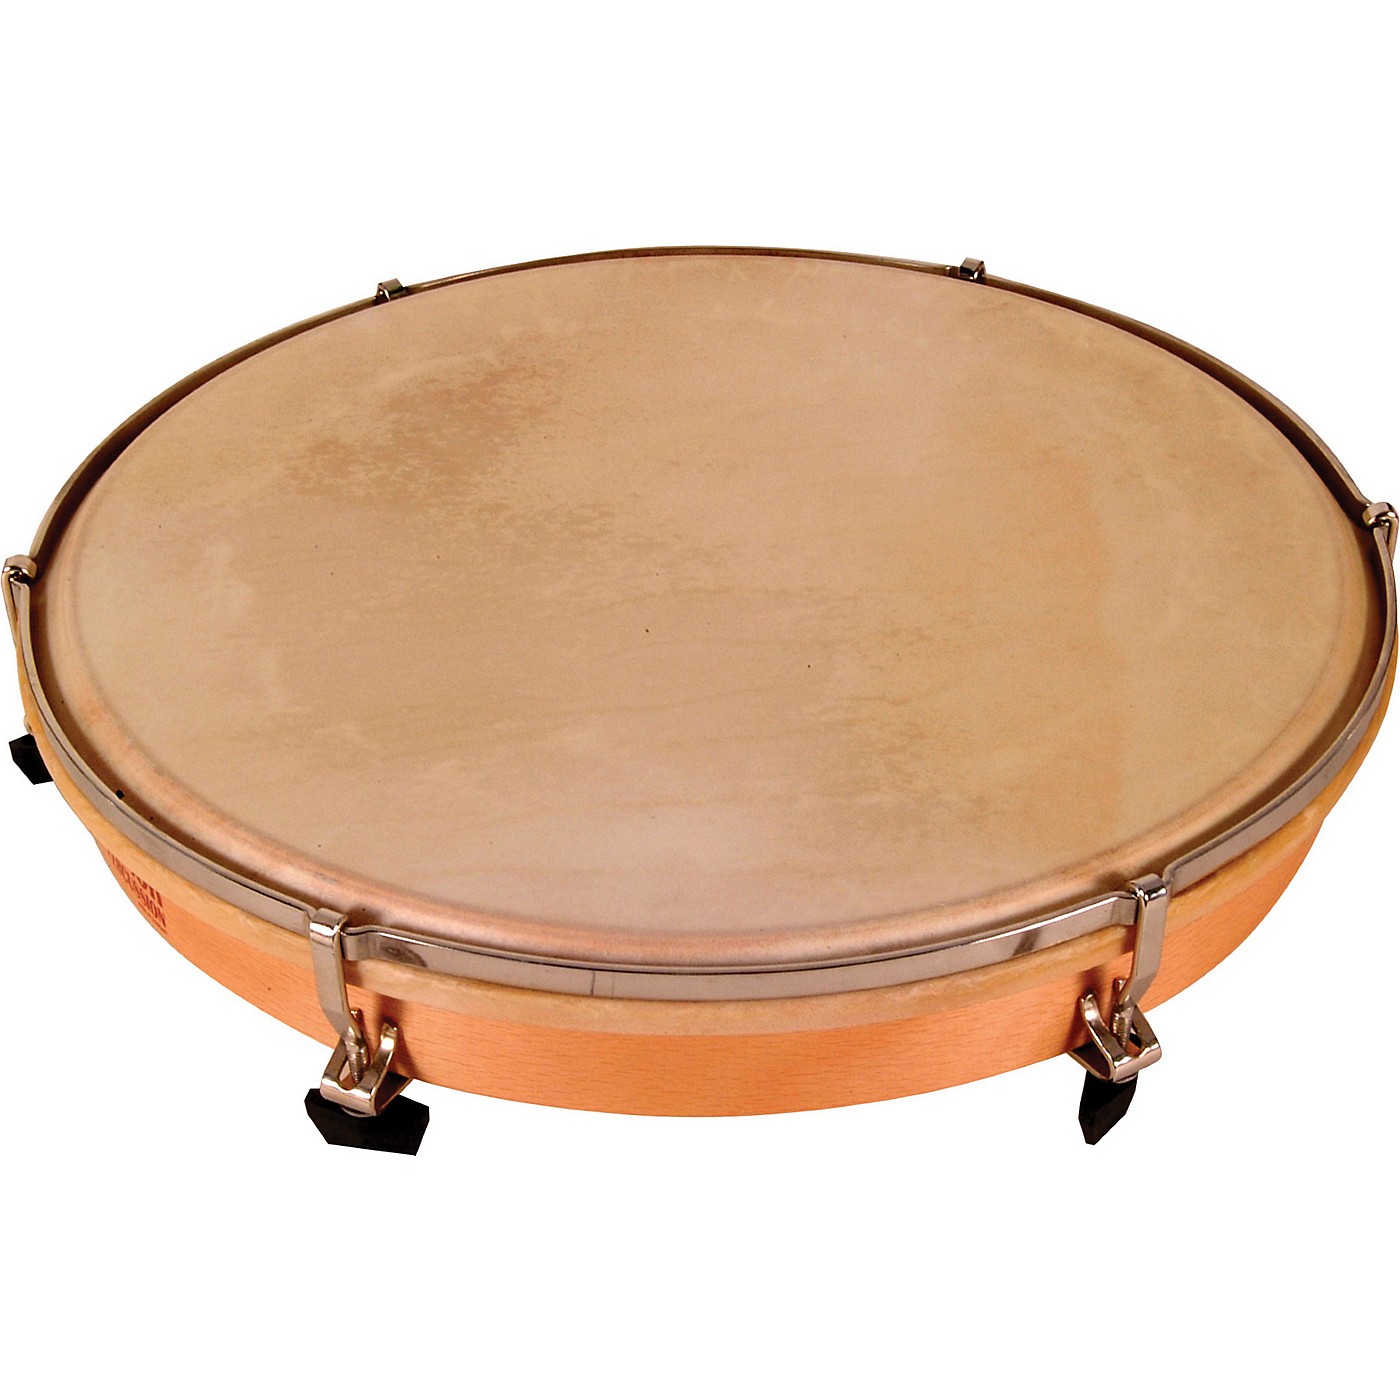 Sonor Orff Hand Drums thumbnail